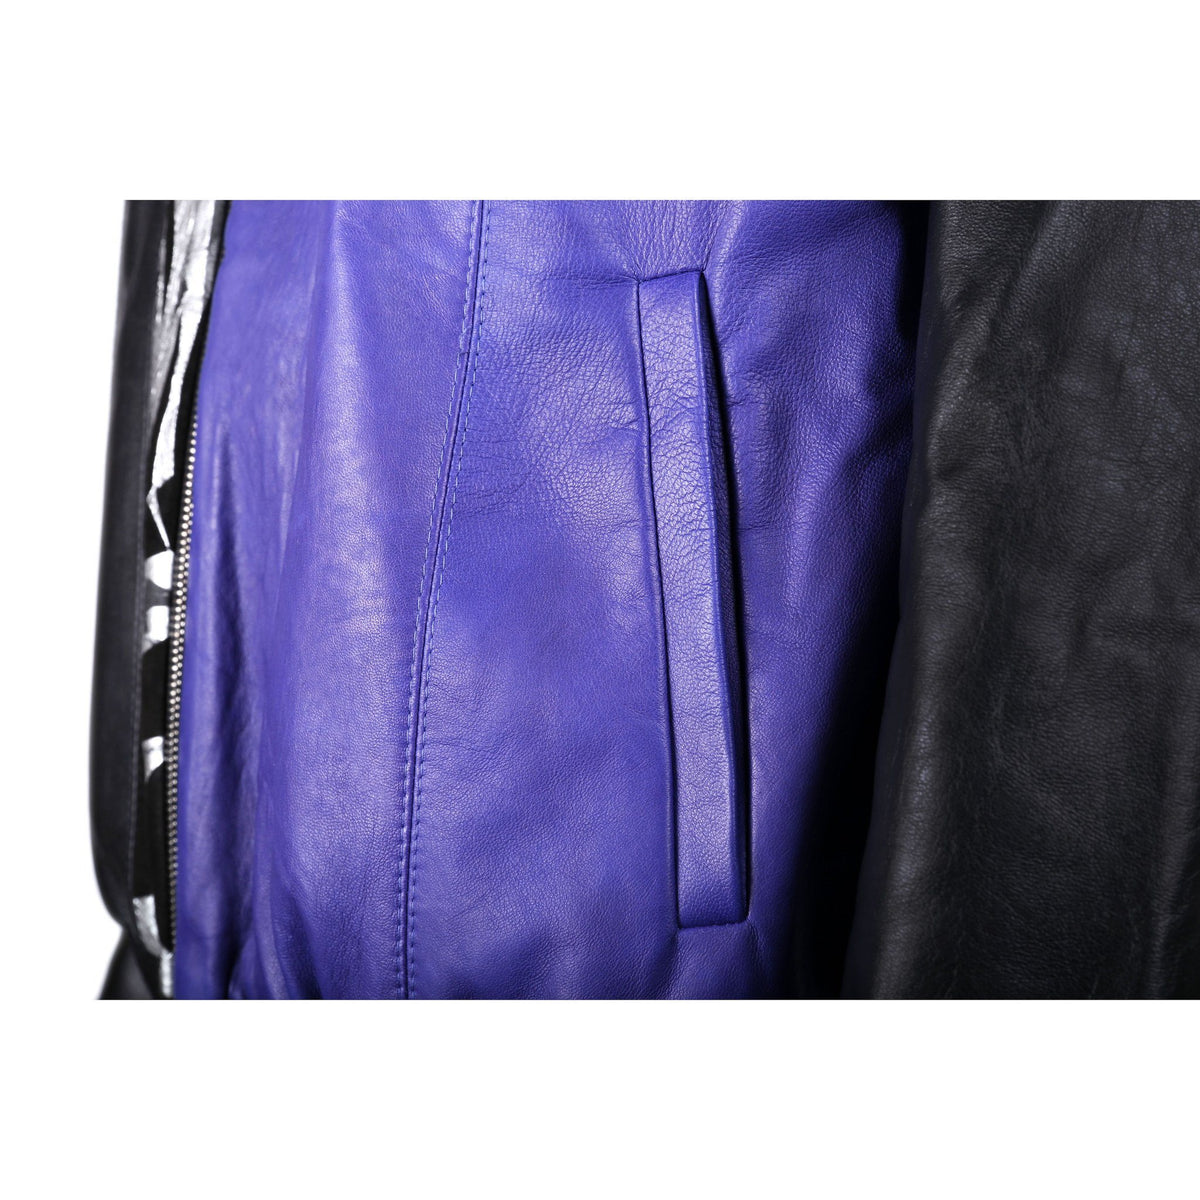 Black and Purple Leather Bomber Jacket with Silver Print Motif - VOLS &amp; ORIGINAL